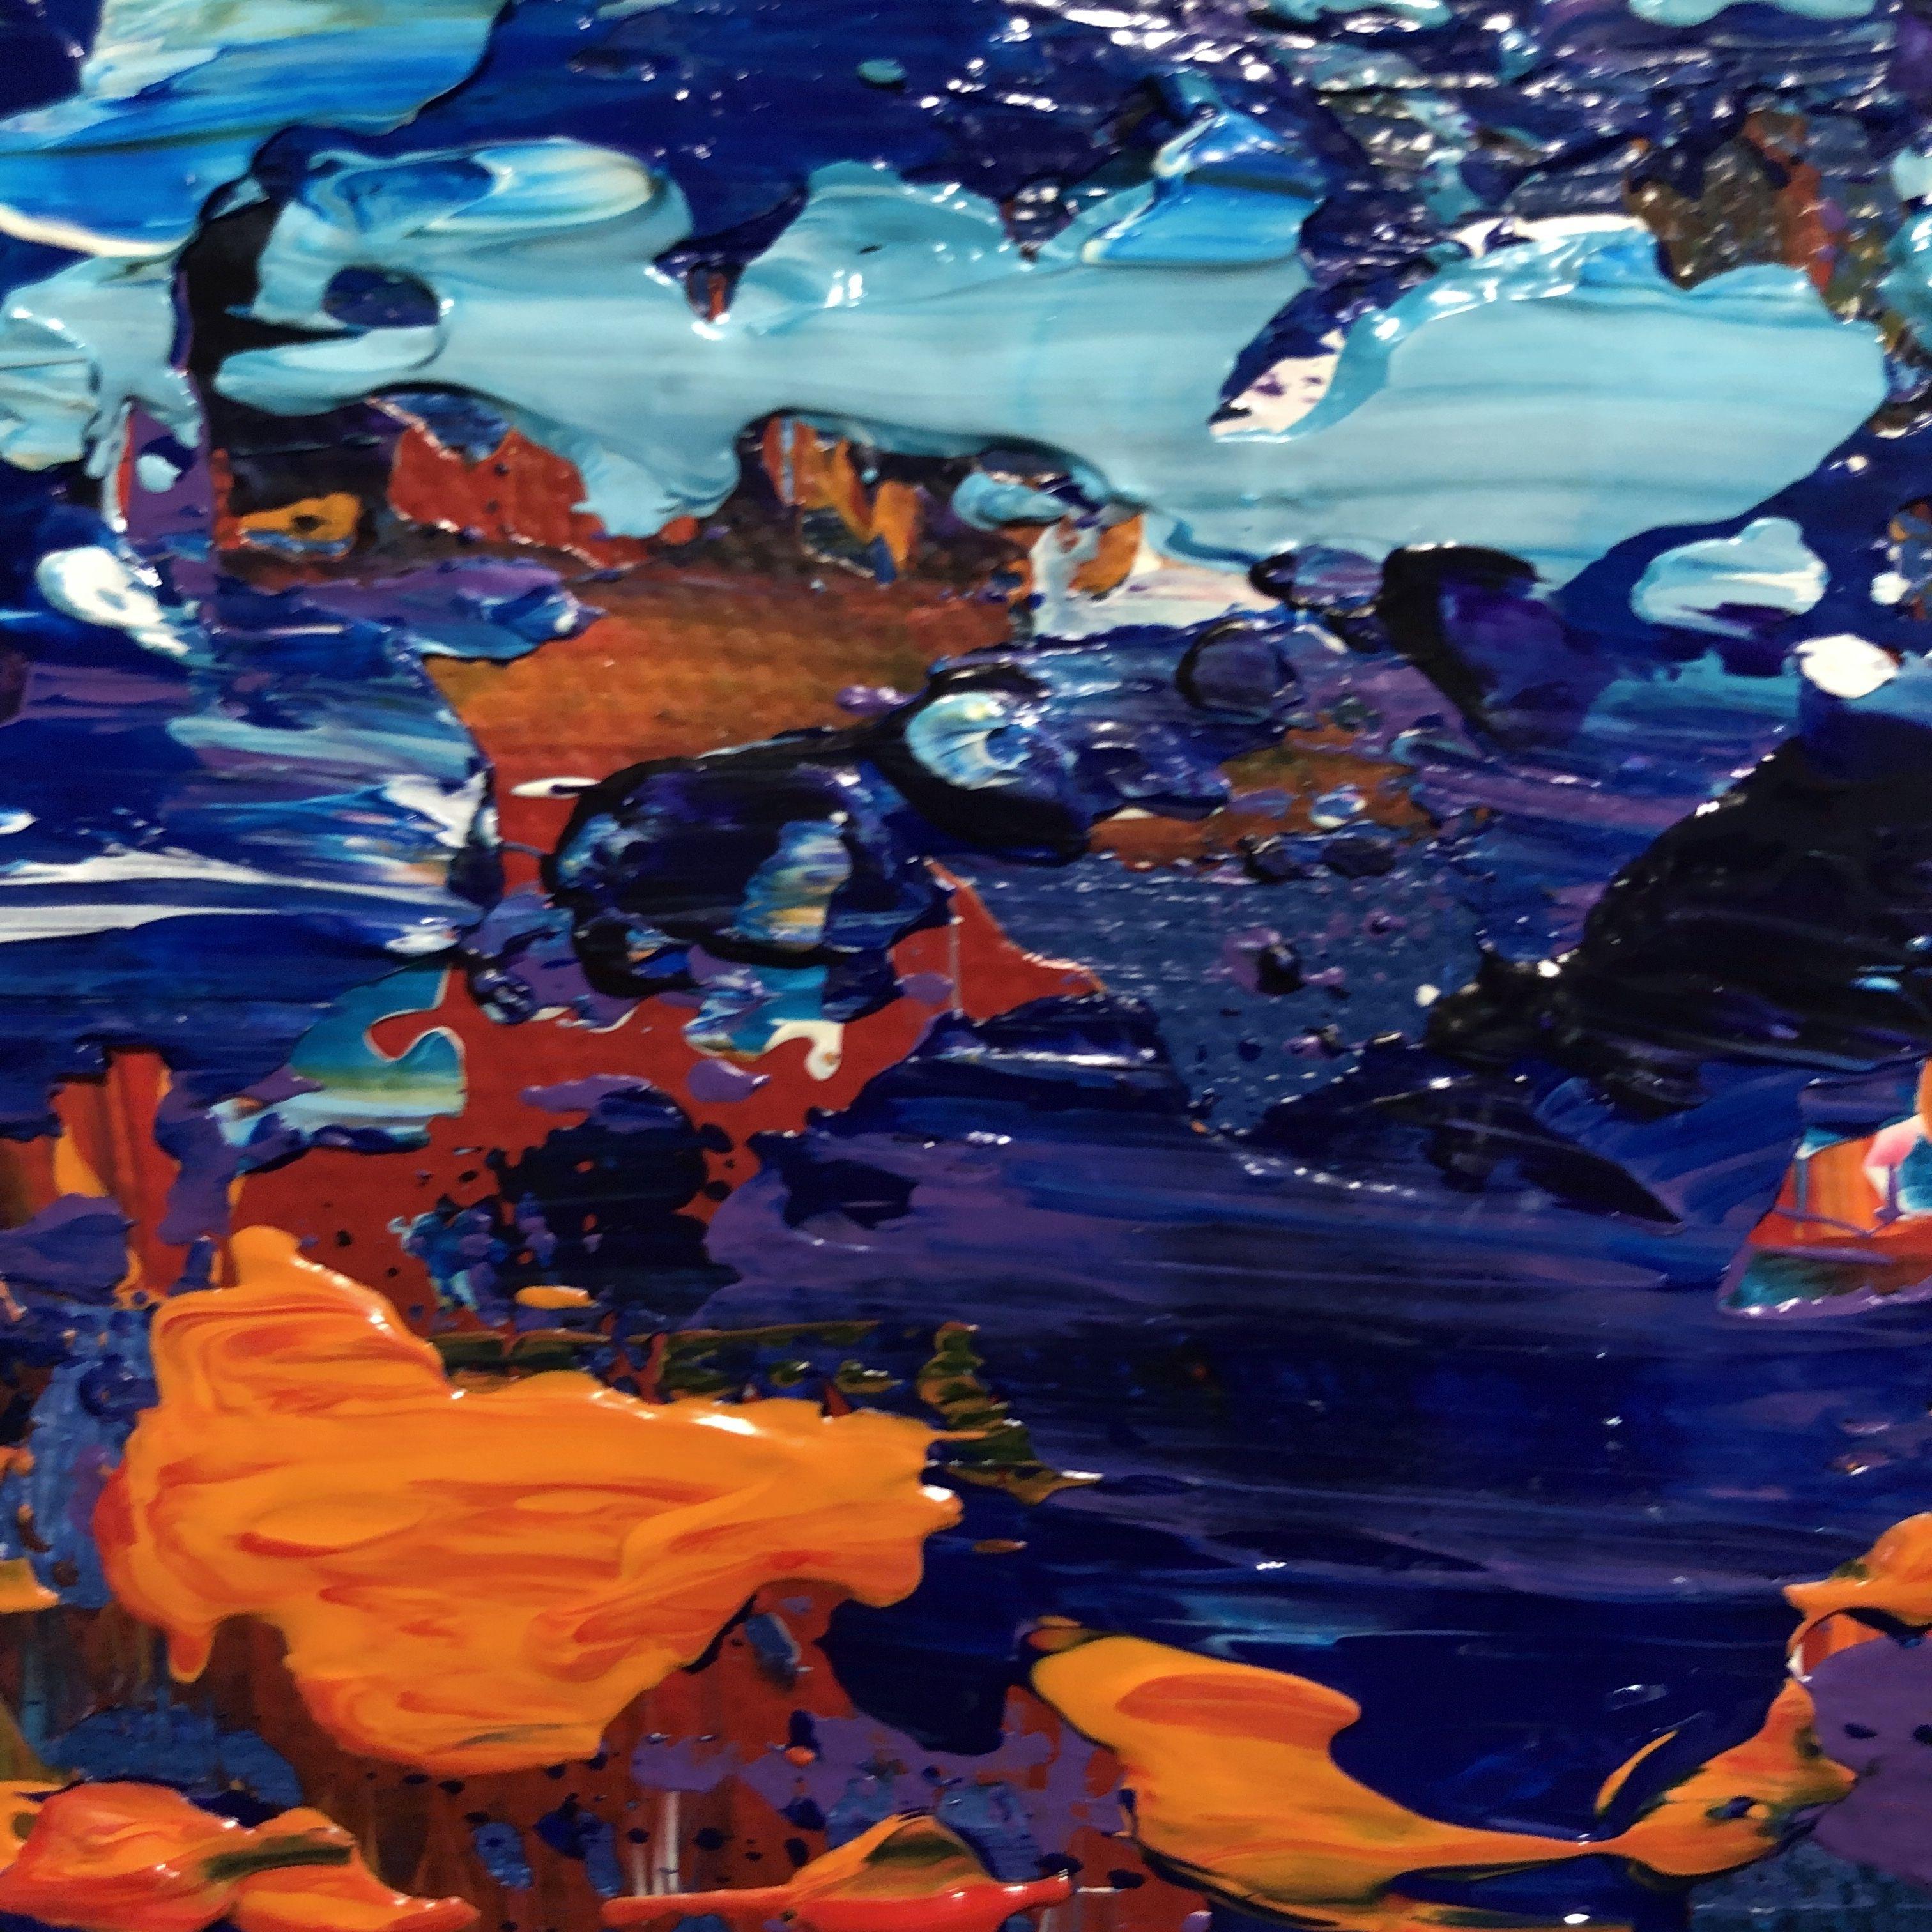 Boats on water - Abstract Seascape Waves, reflections, sea water in motion¦ Let your imagination free¦ Colorful painting realised in the style of Gerhard Richter. Multiple layers of acrylic painting has been applied on the canvas. Rich texture. The